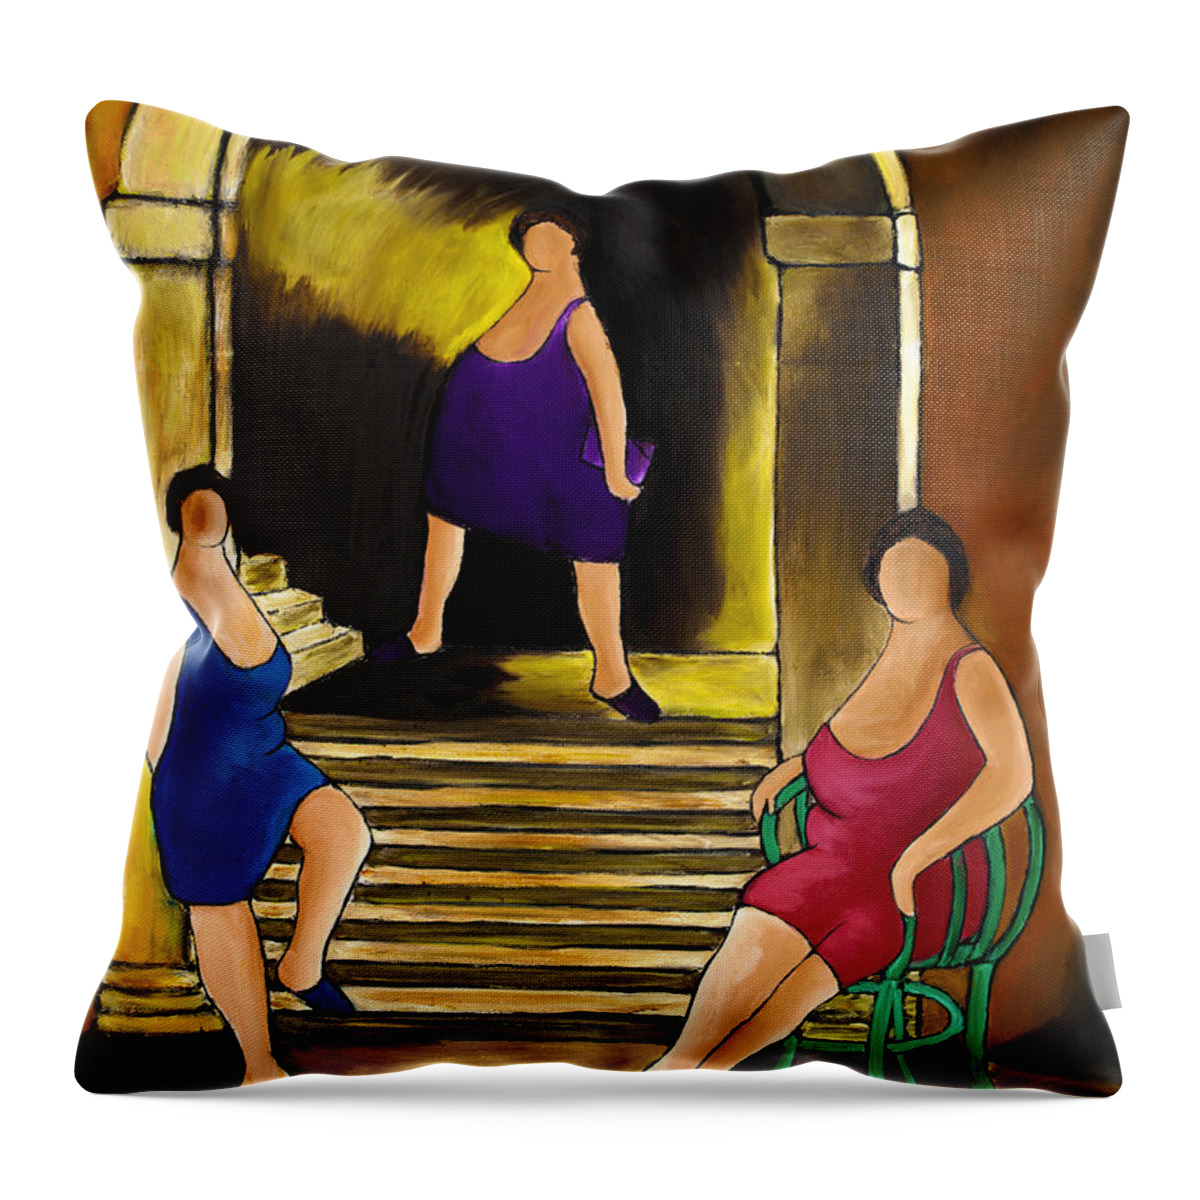 Working Women Throw Pillow featuring the painting Ladies Of The Night by William Cain